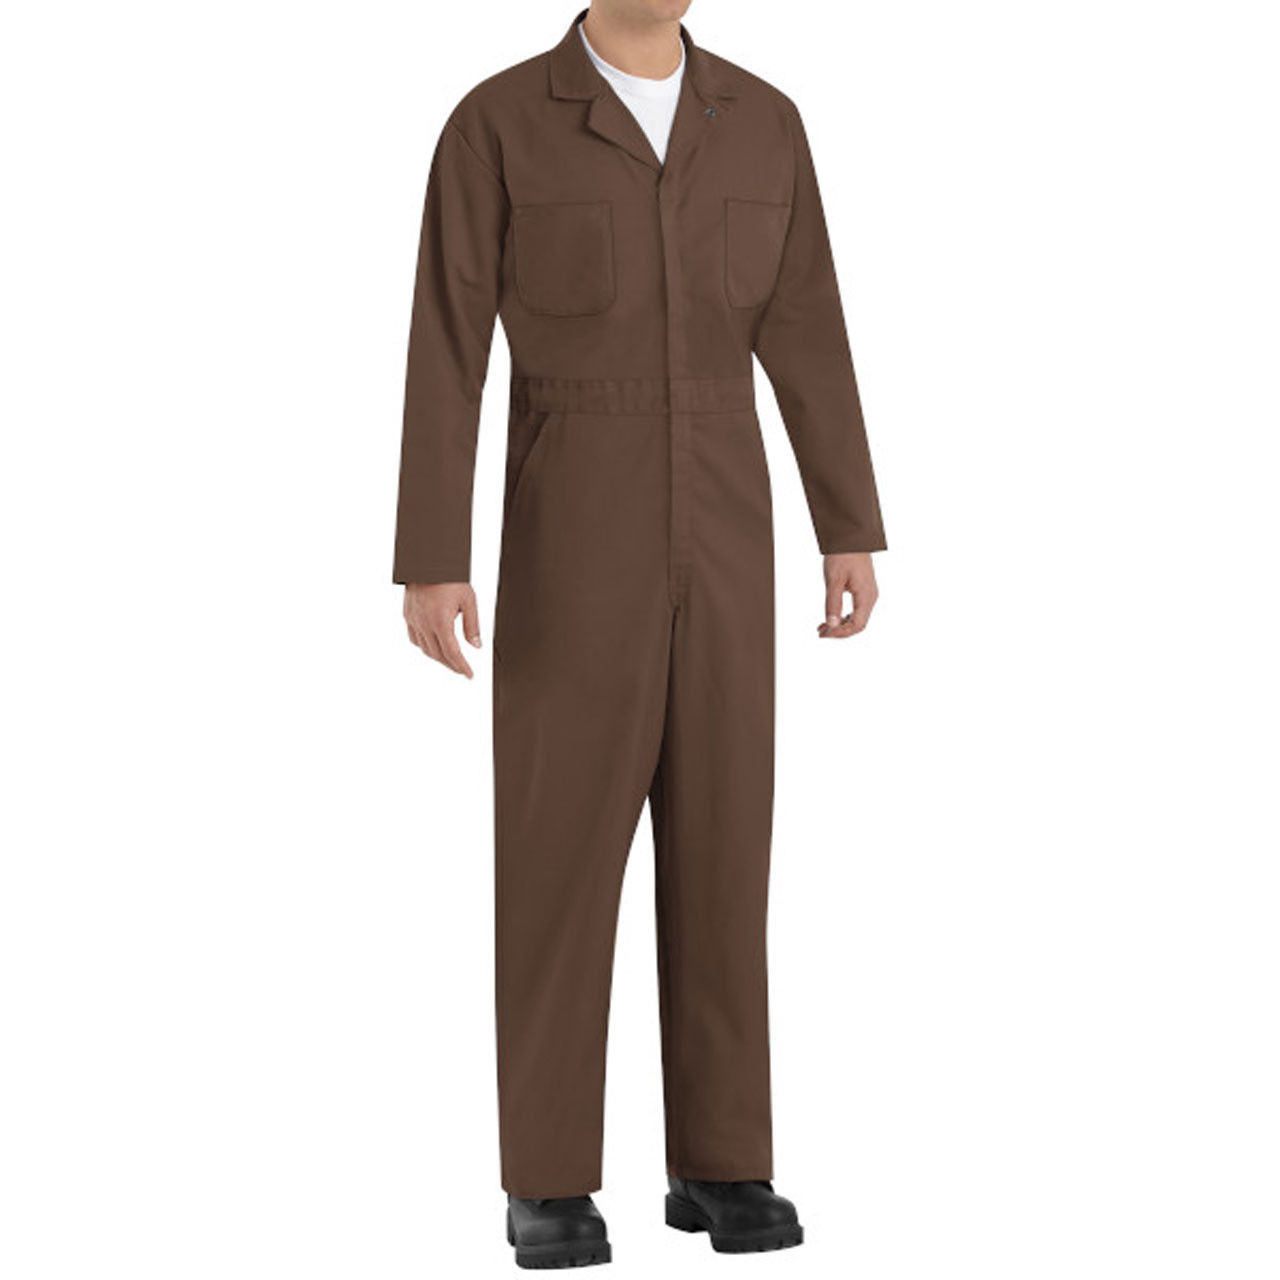 Is the brown coveralls part of the Twill Action Back collection?